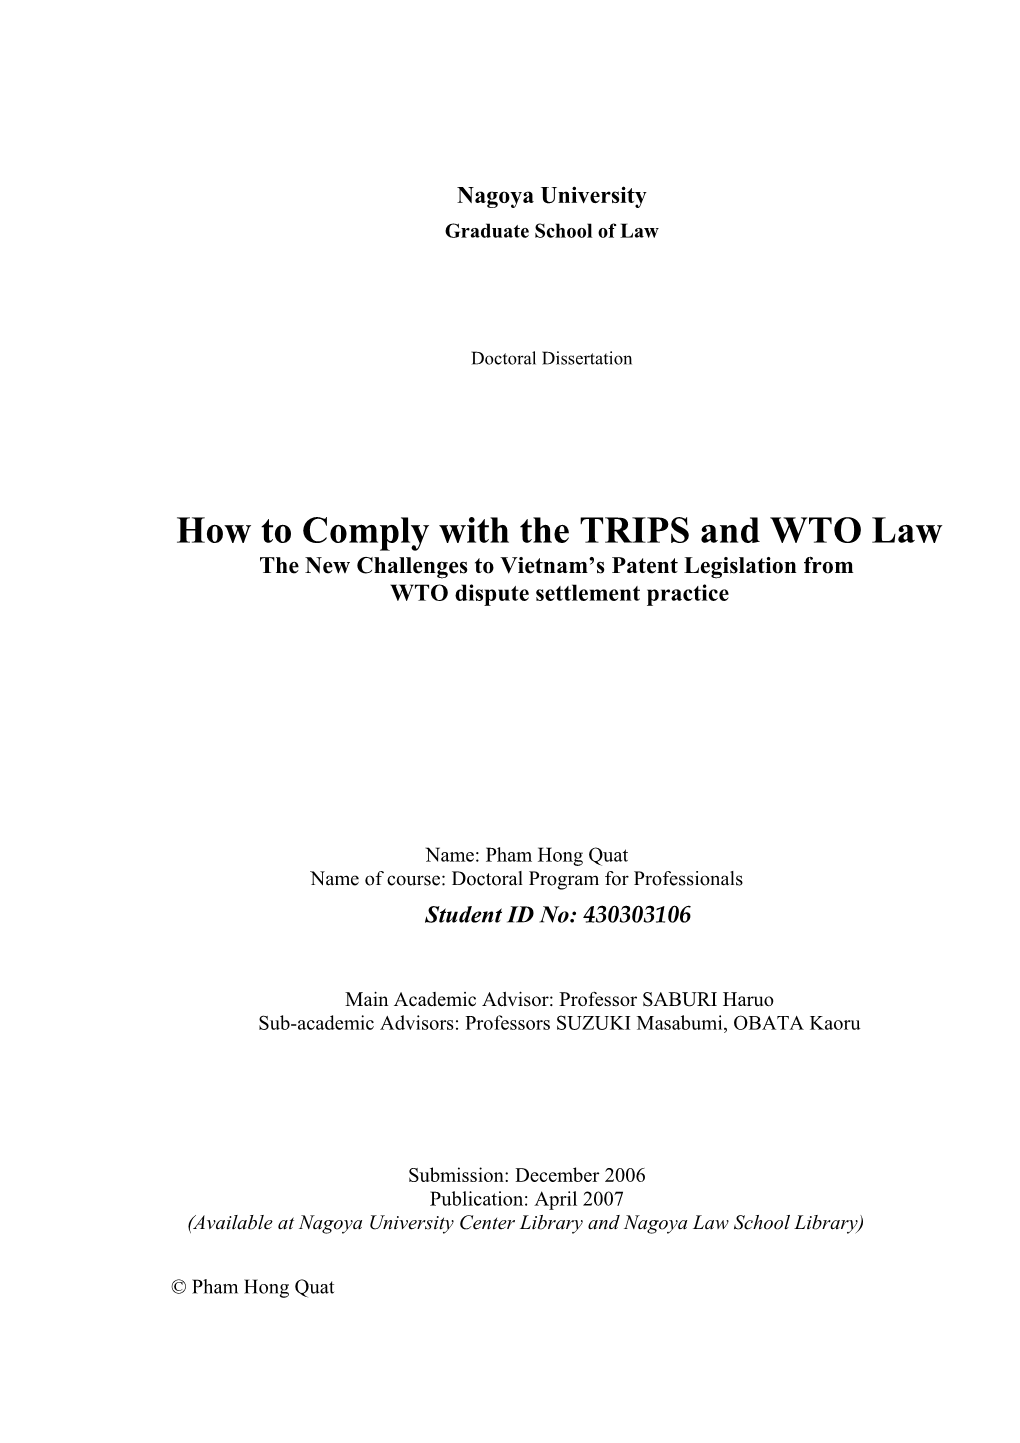 How to Comply with the TRIPS and WTO Law the New Challenges to Vietnam’S Patent Legislation from WTO Dispute Settlement Practice